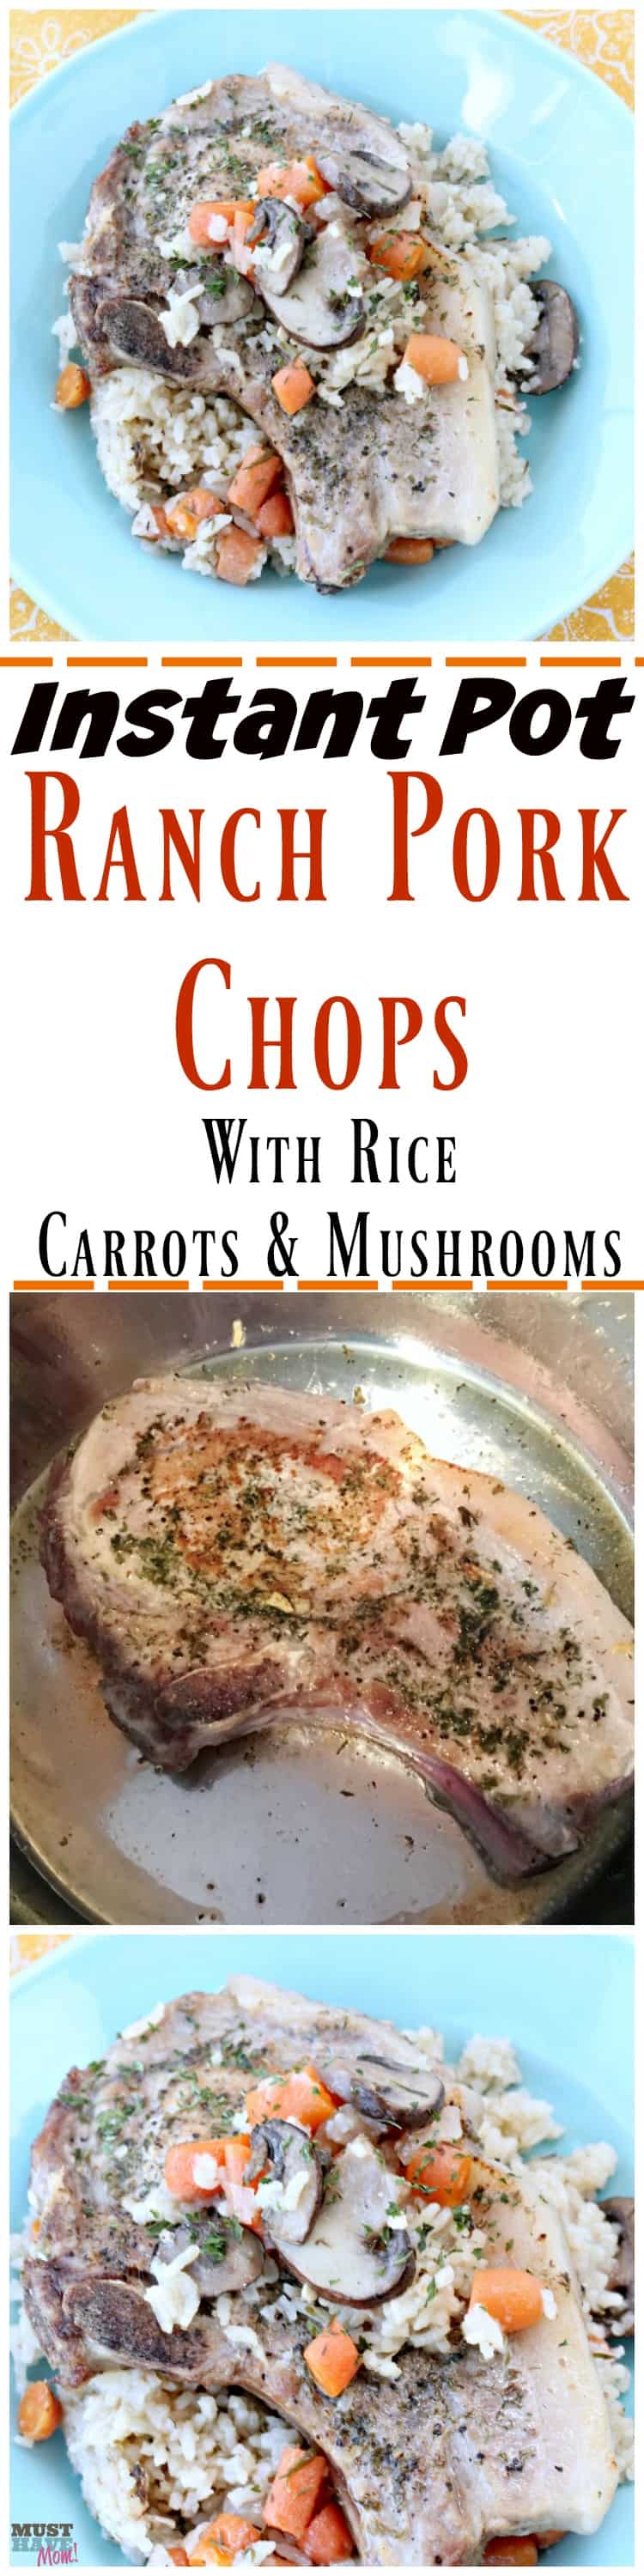 Instant Pot ranch pork chops with rice, carrots and mushrooms all cooked at the same time! Great one pot meal. Cook pork chops and rice together in the instant pot!